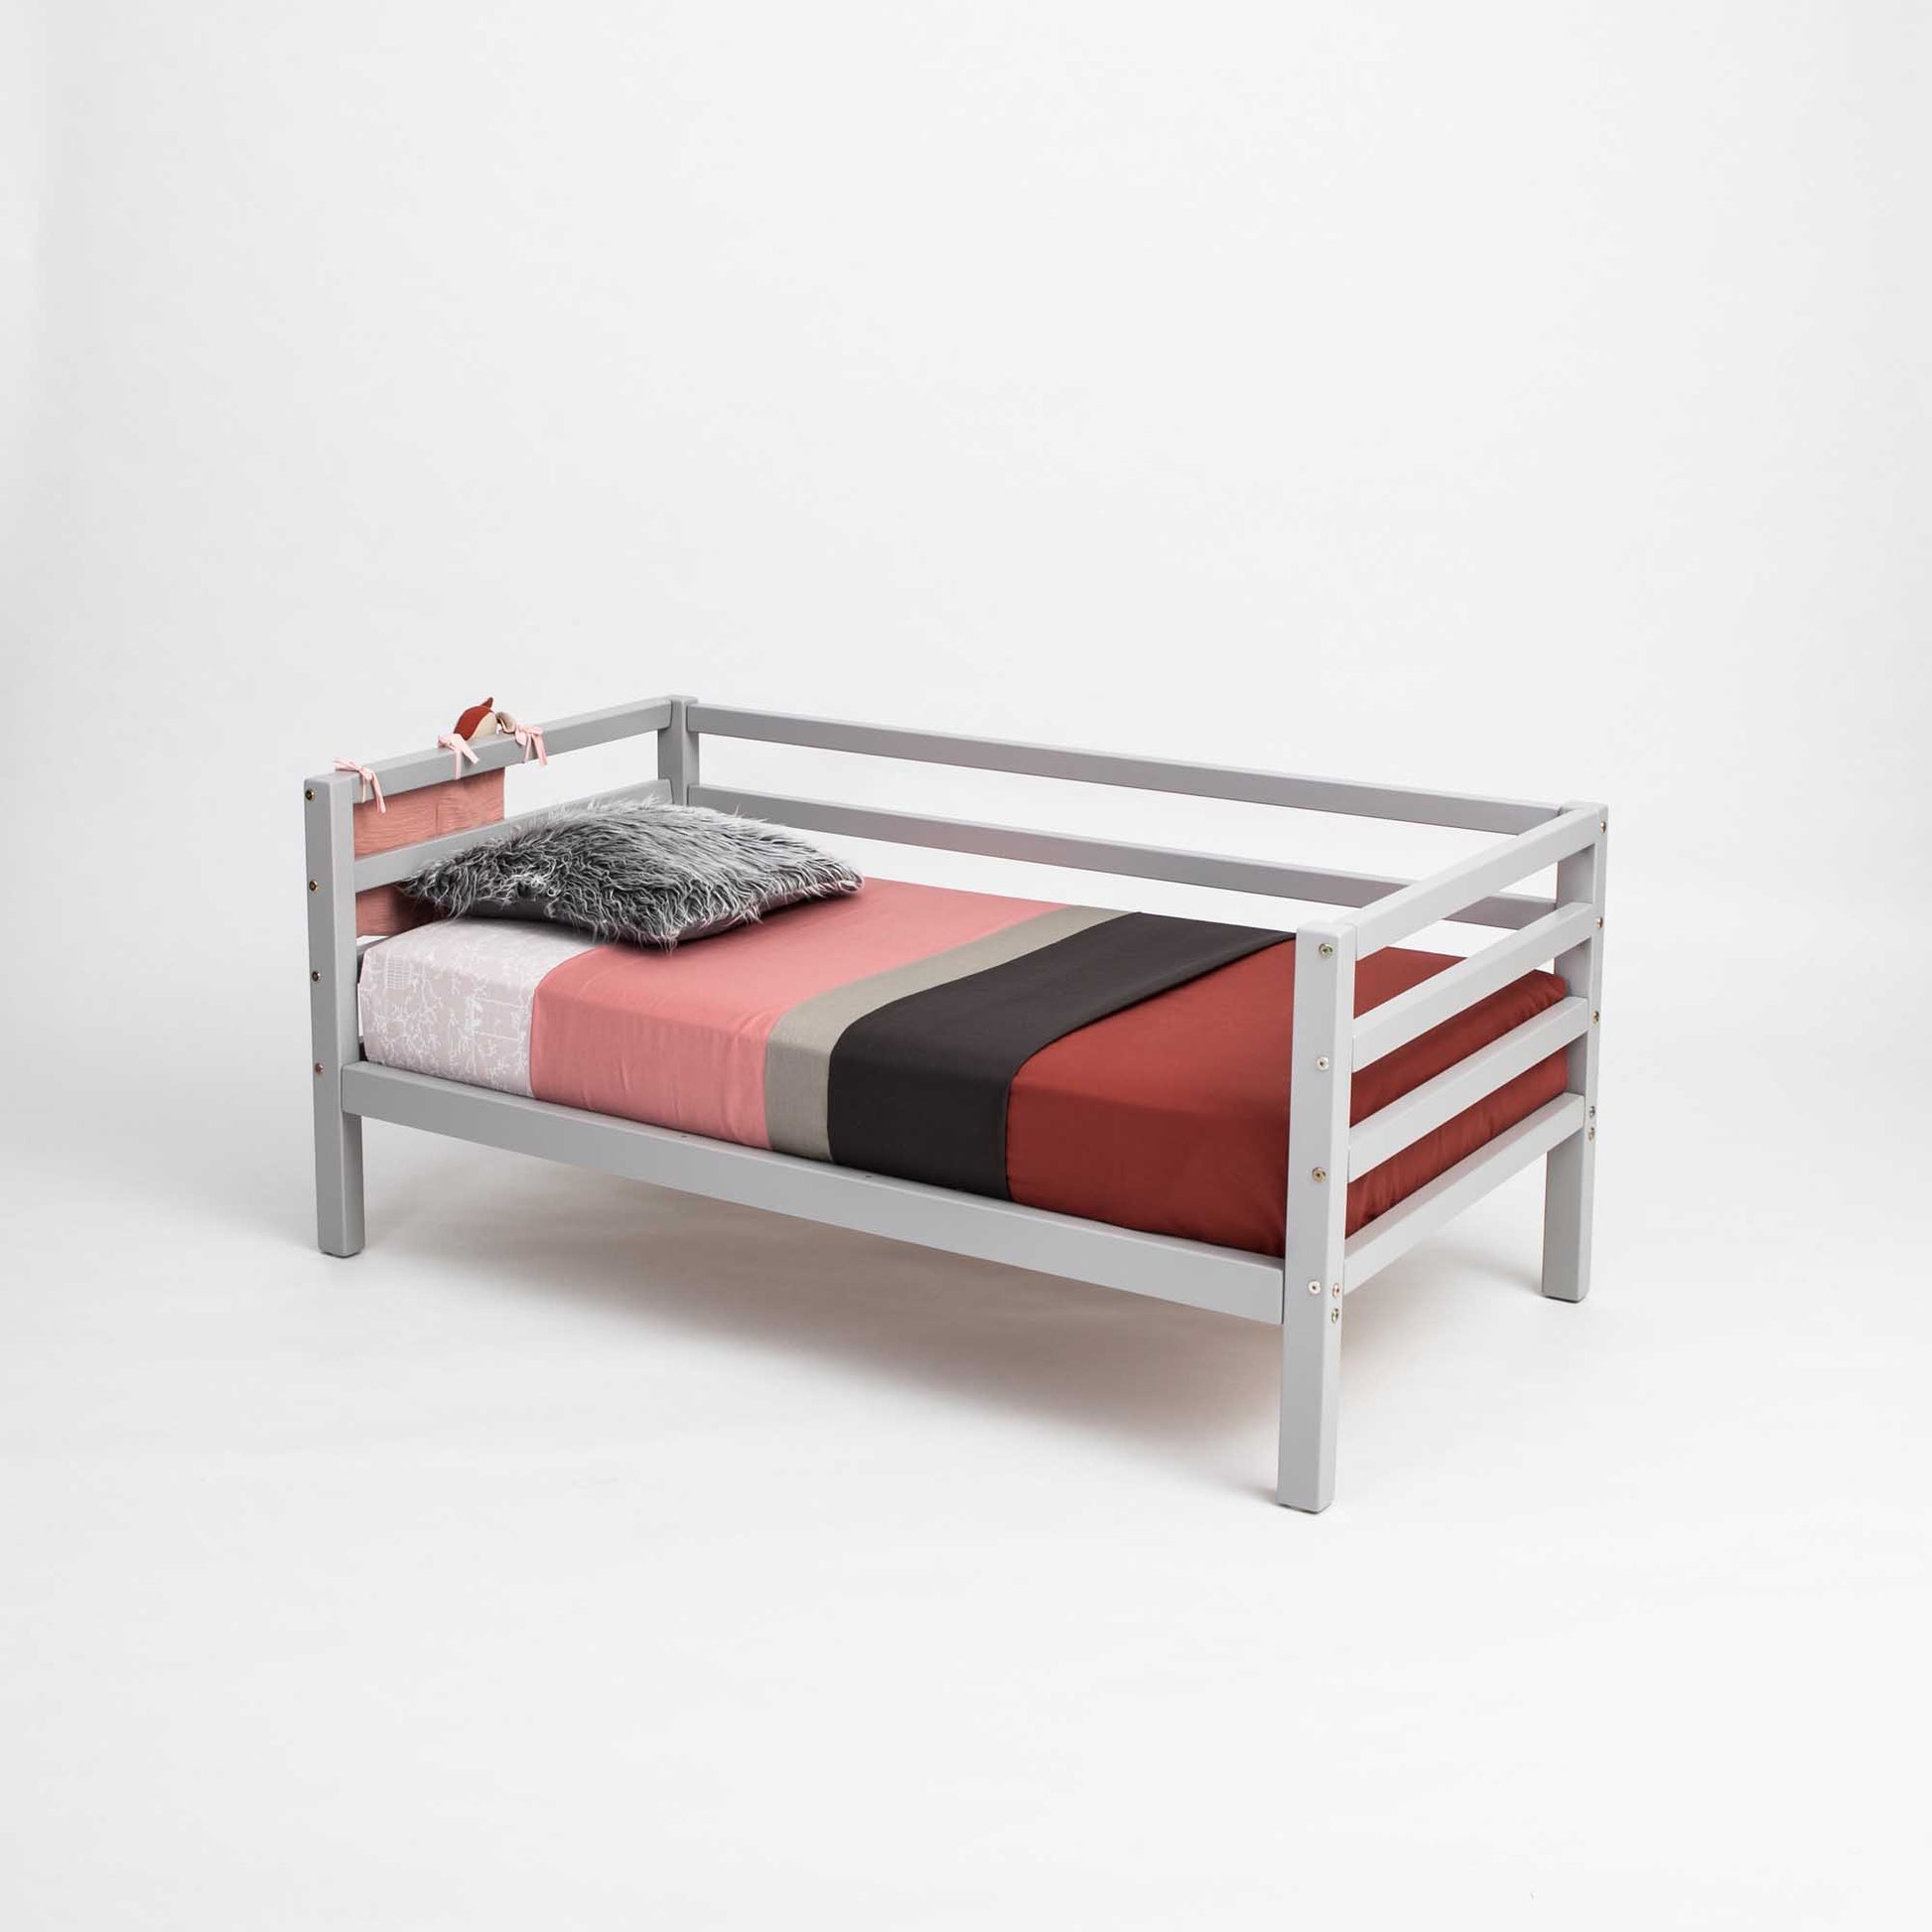 A Sweet Home From Wood kids' bed on legs with a 3-sided horizontal rail and red bedding.